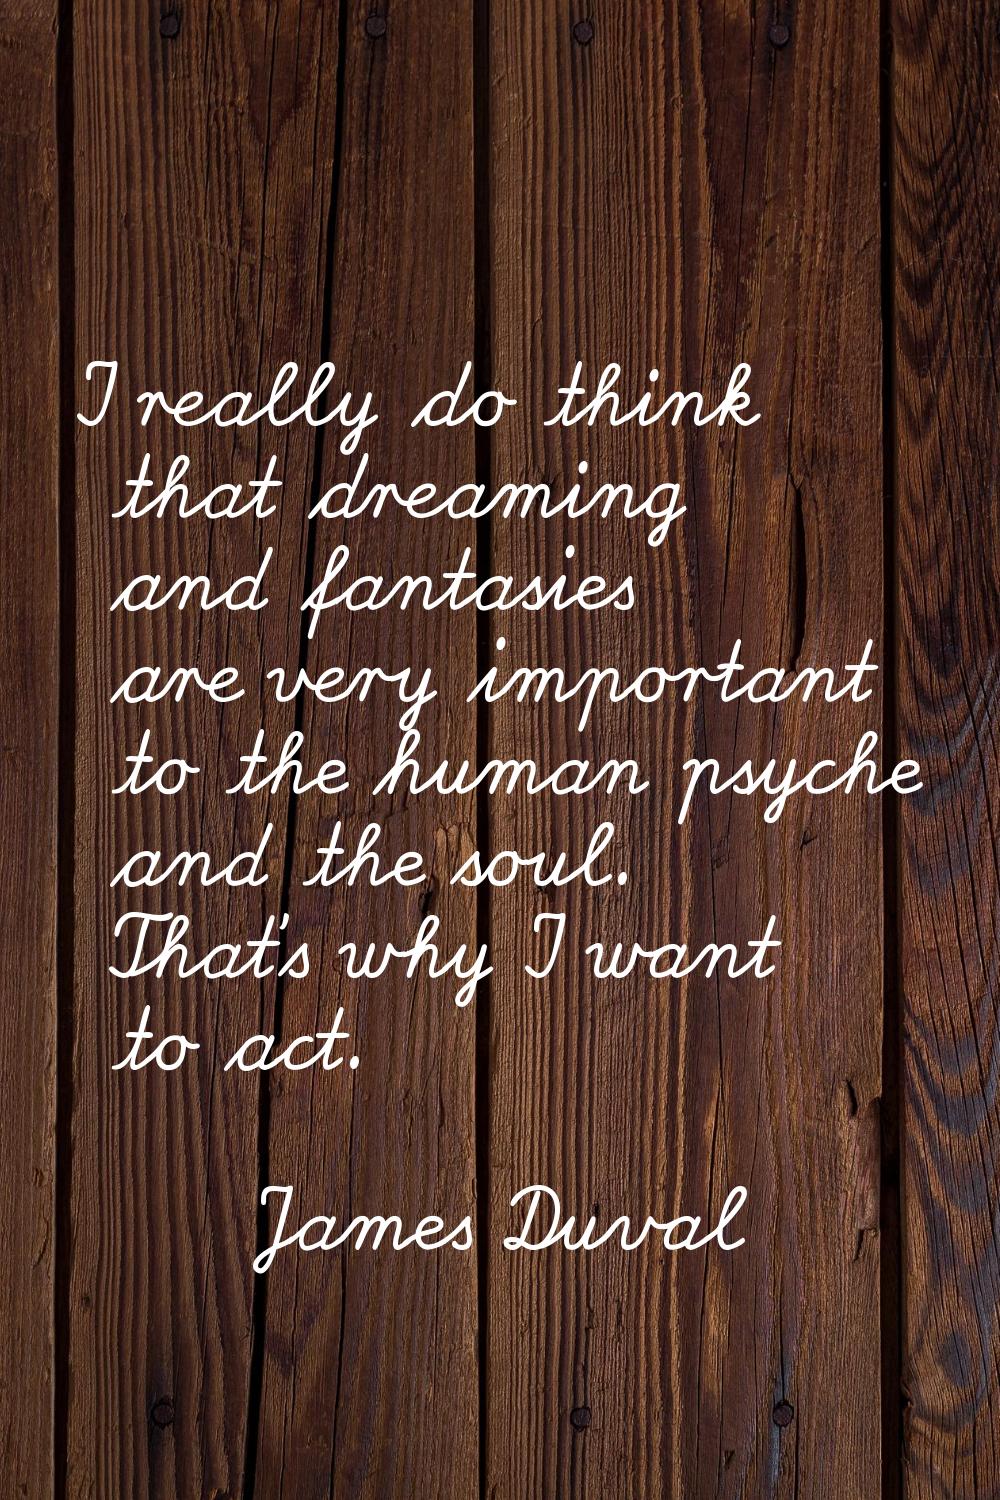 I really do think that dreaming and fantasies are very important to the human psyche and the soul. 